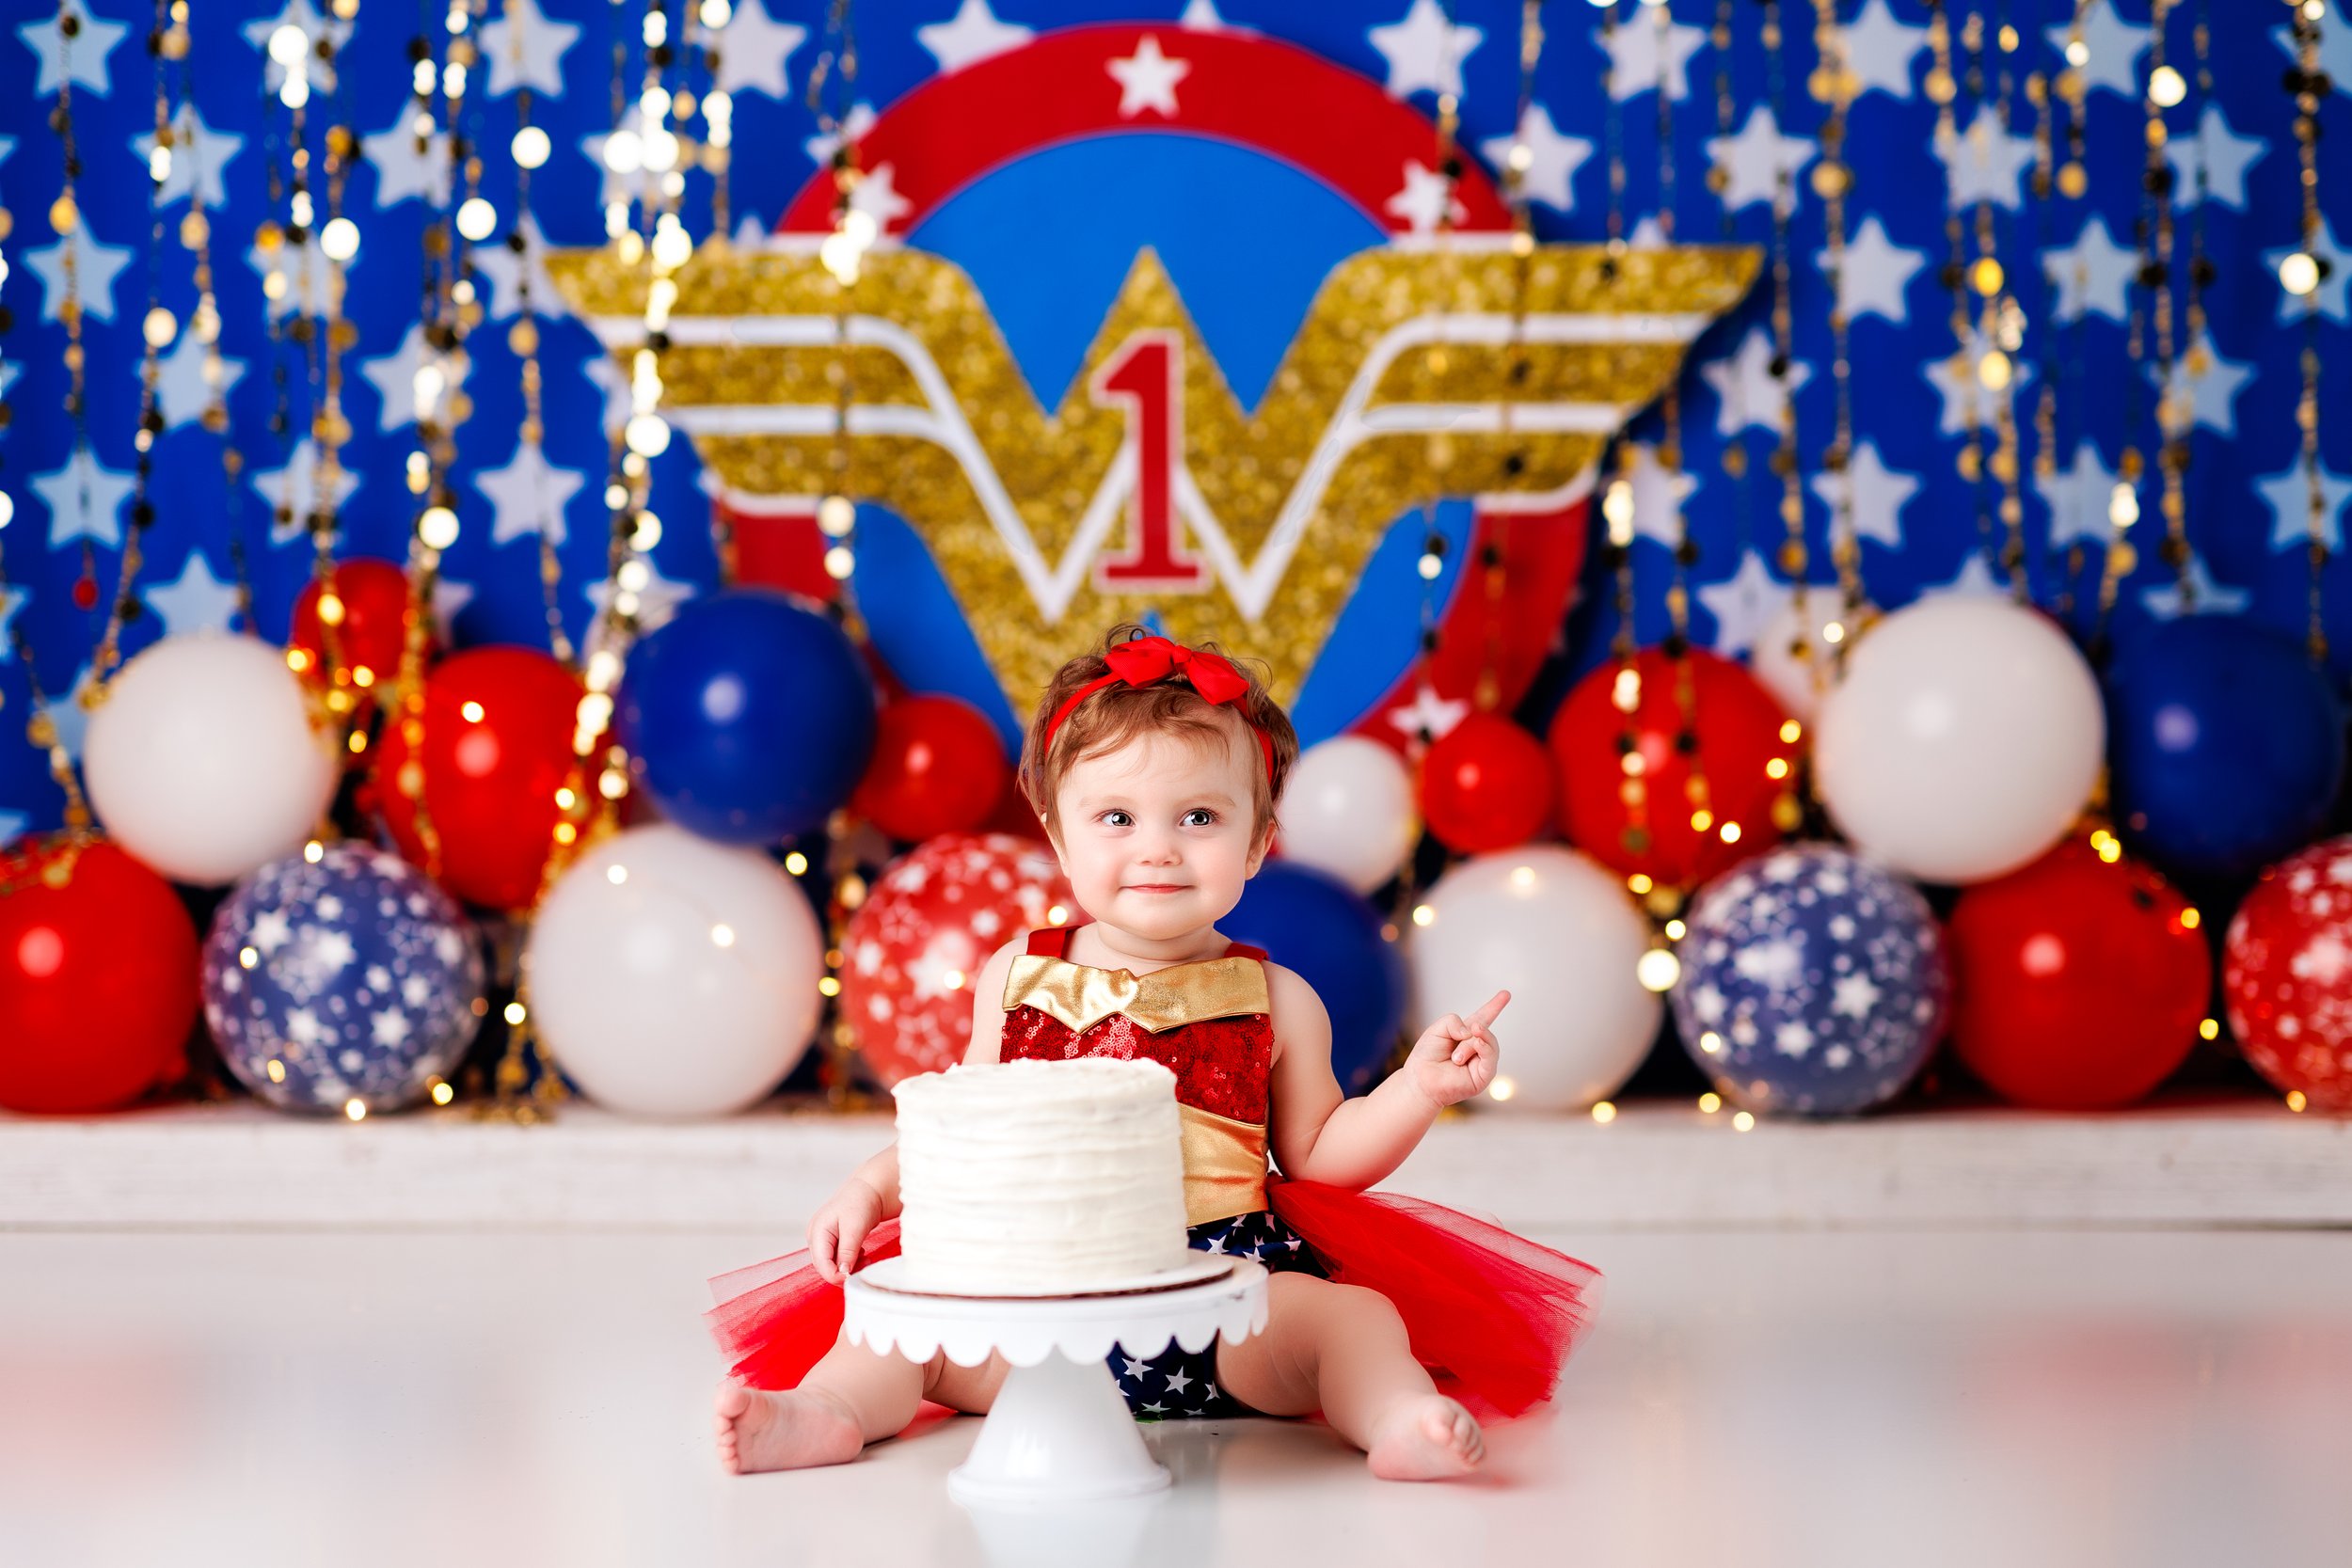  Baby in red and blue dress with red, white, and blue balloons and the Wonder Woman logo behind her  